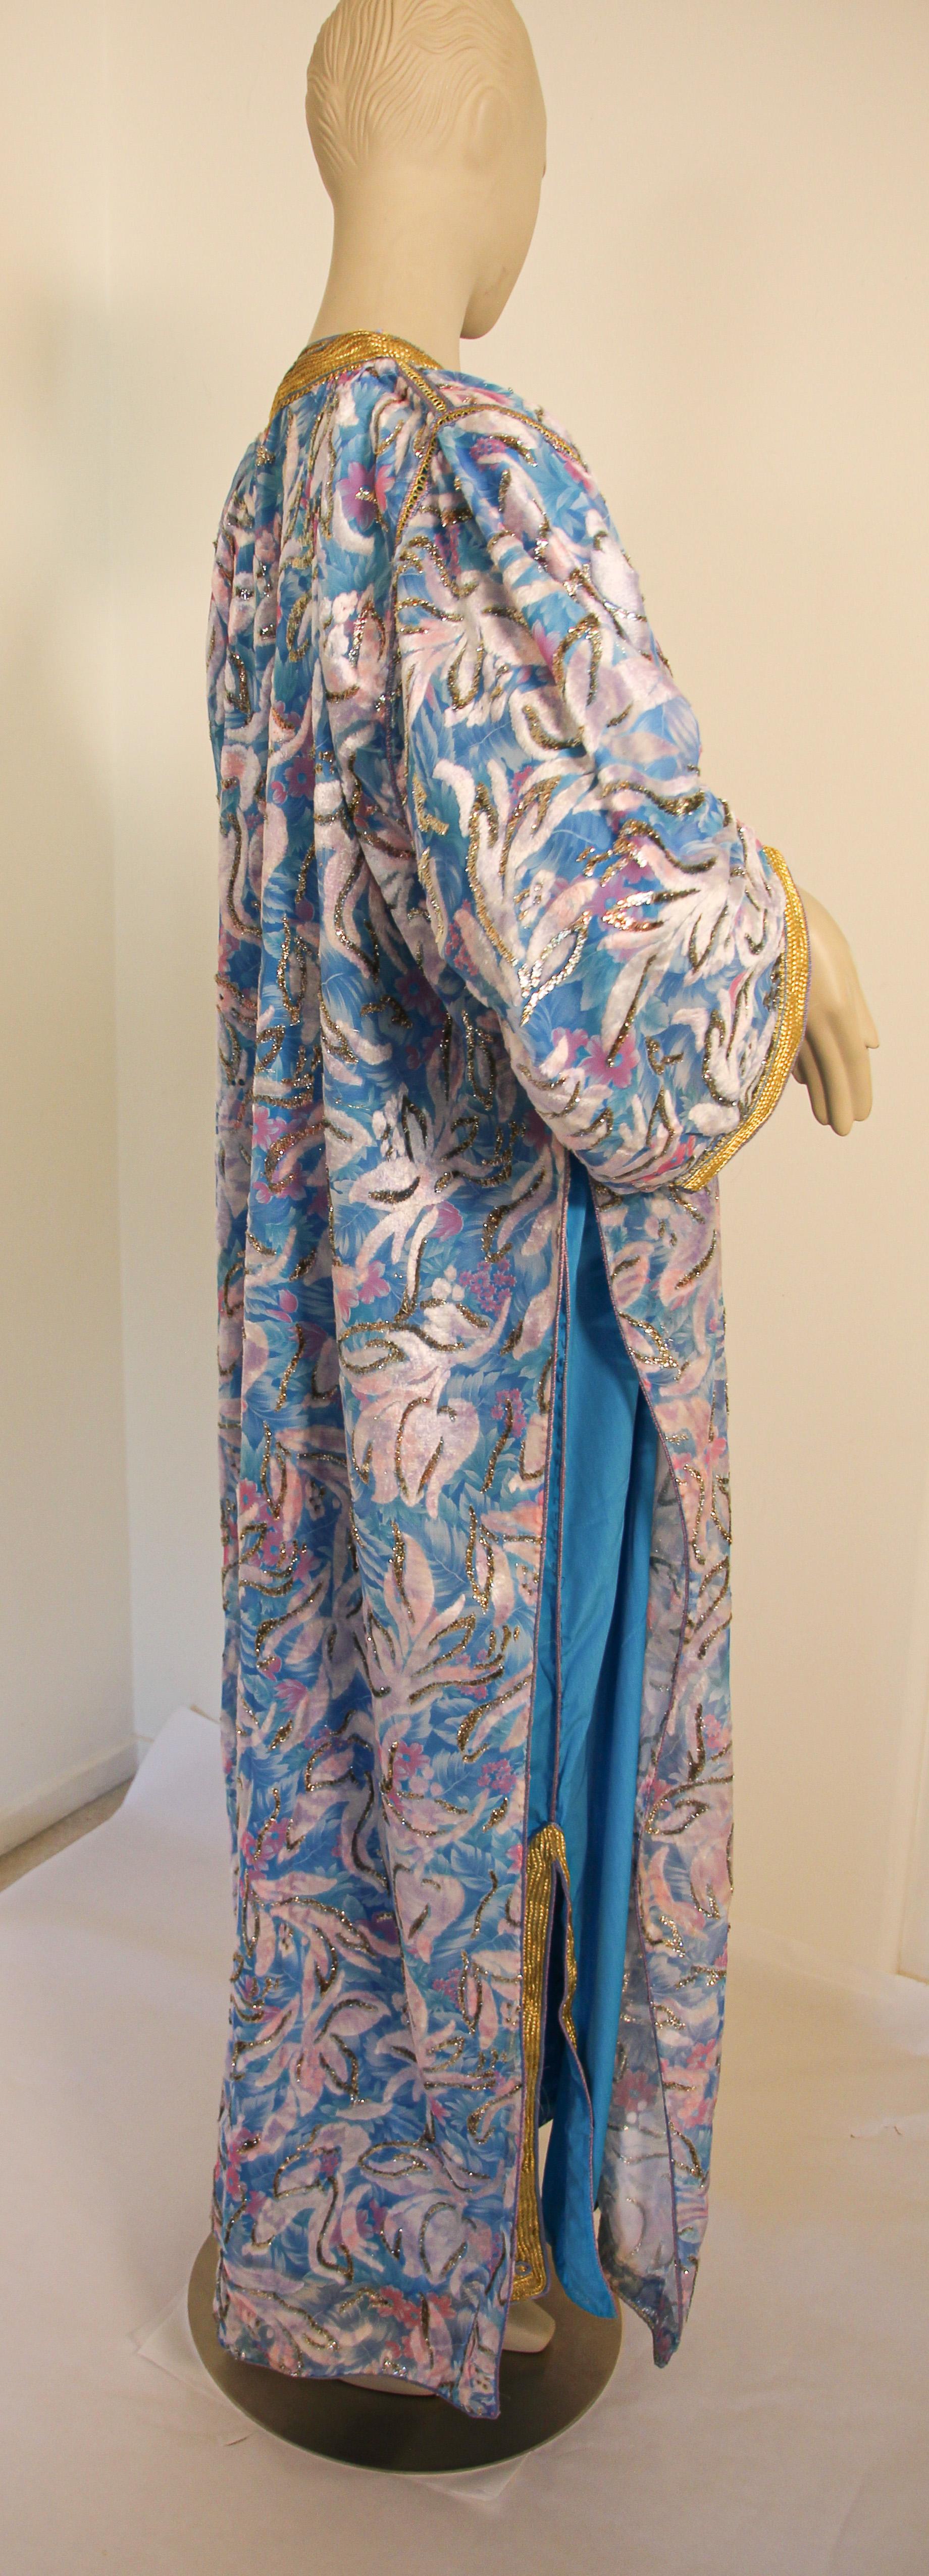 Moroccan Kaftan in Turquoise and Gold Floral Brocade Metallic Lame For Sale 2